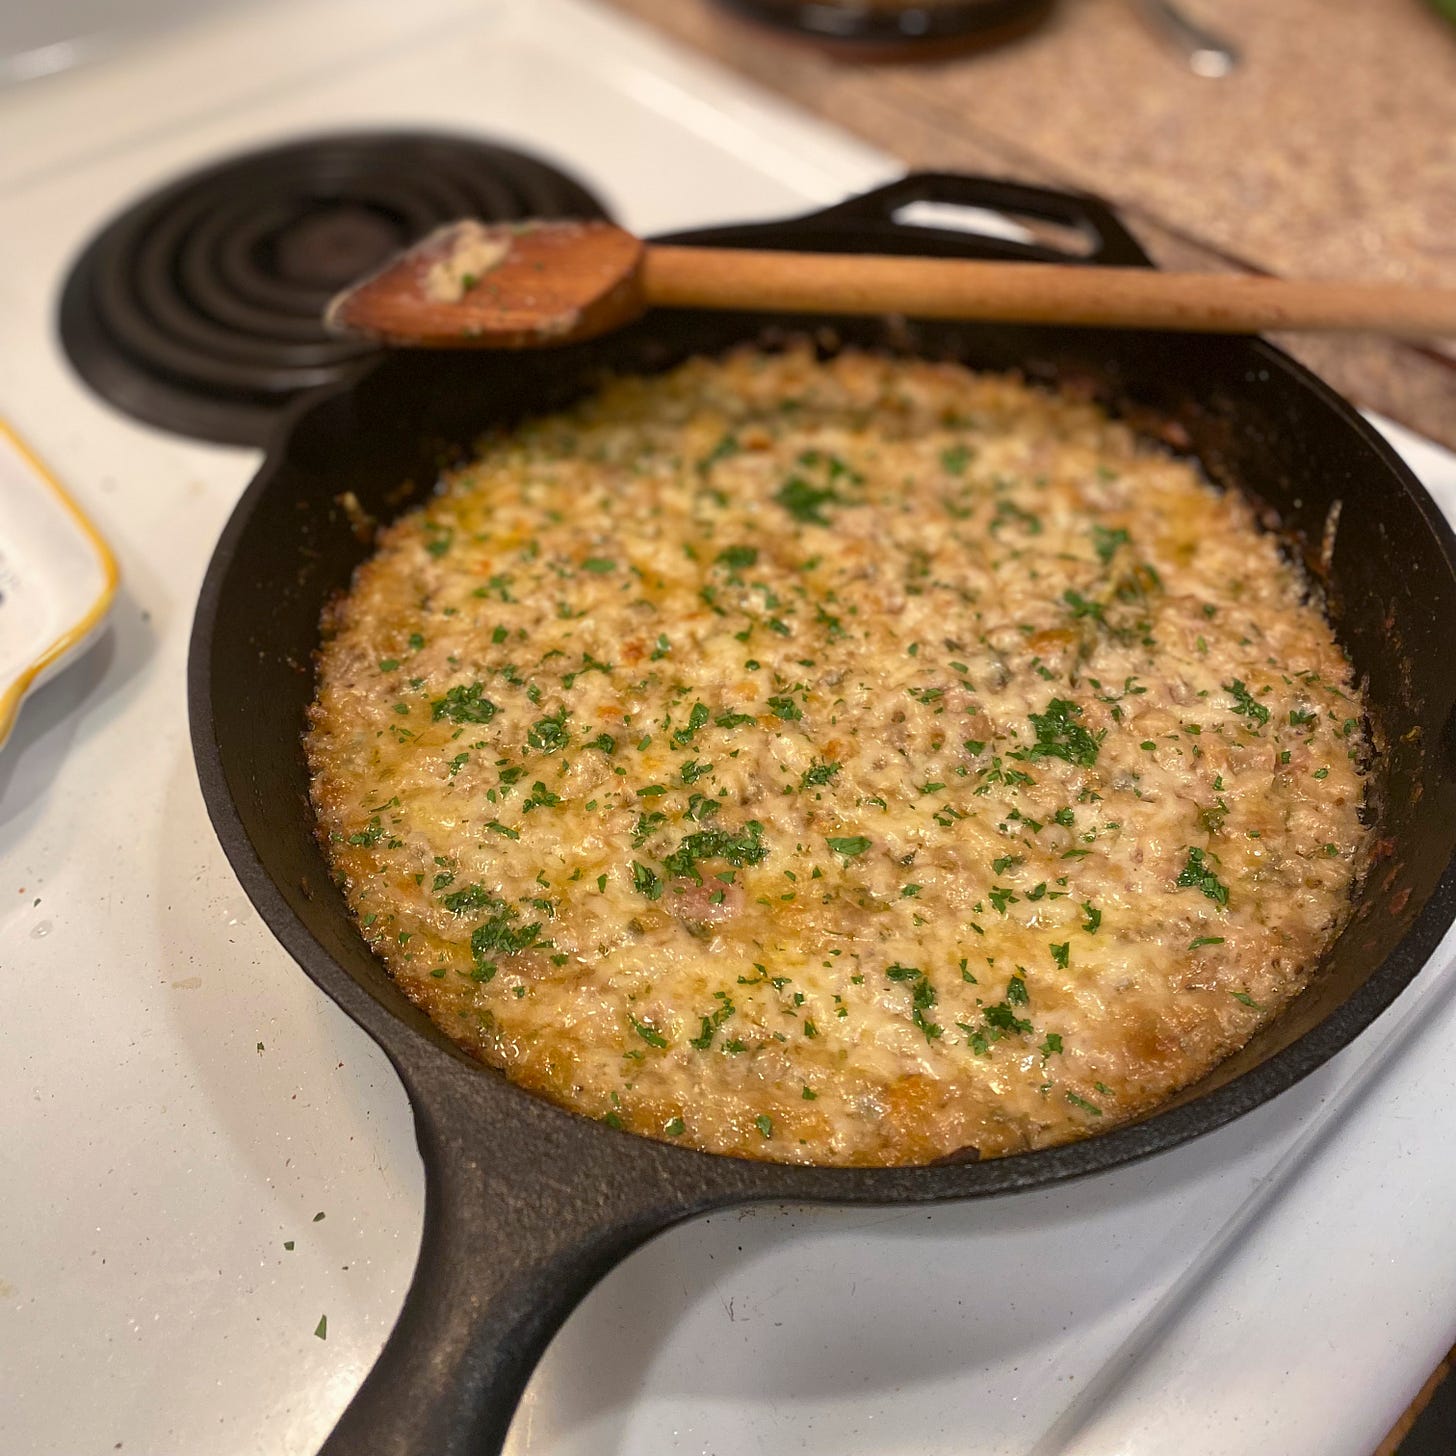 A cast iron pan with a wooden spoon resting on its edge, the pan full of the tuna white bean casserole described above. Cheese is melted and browned on top and it's dusted with chopped parsley.